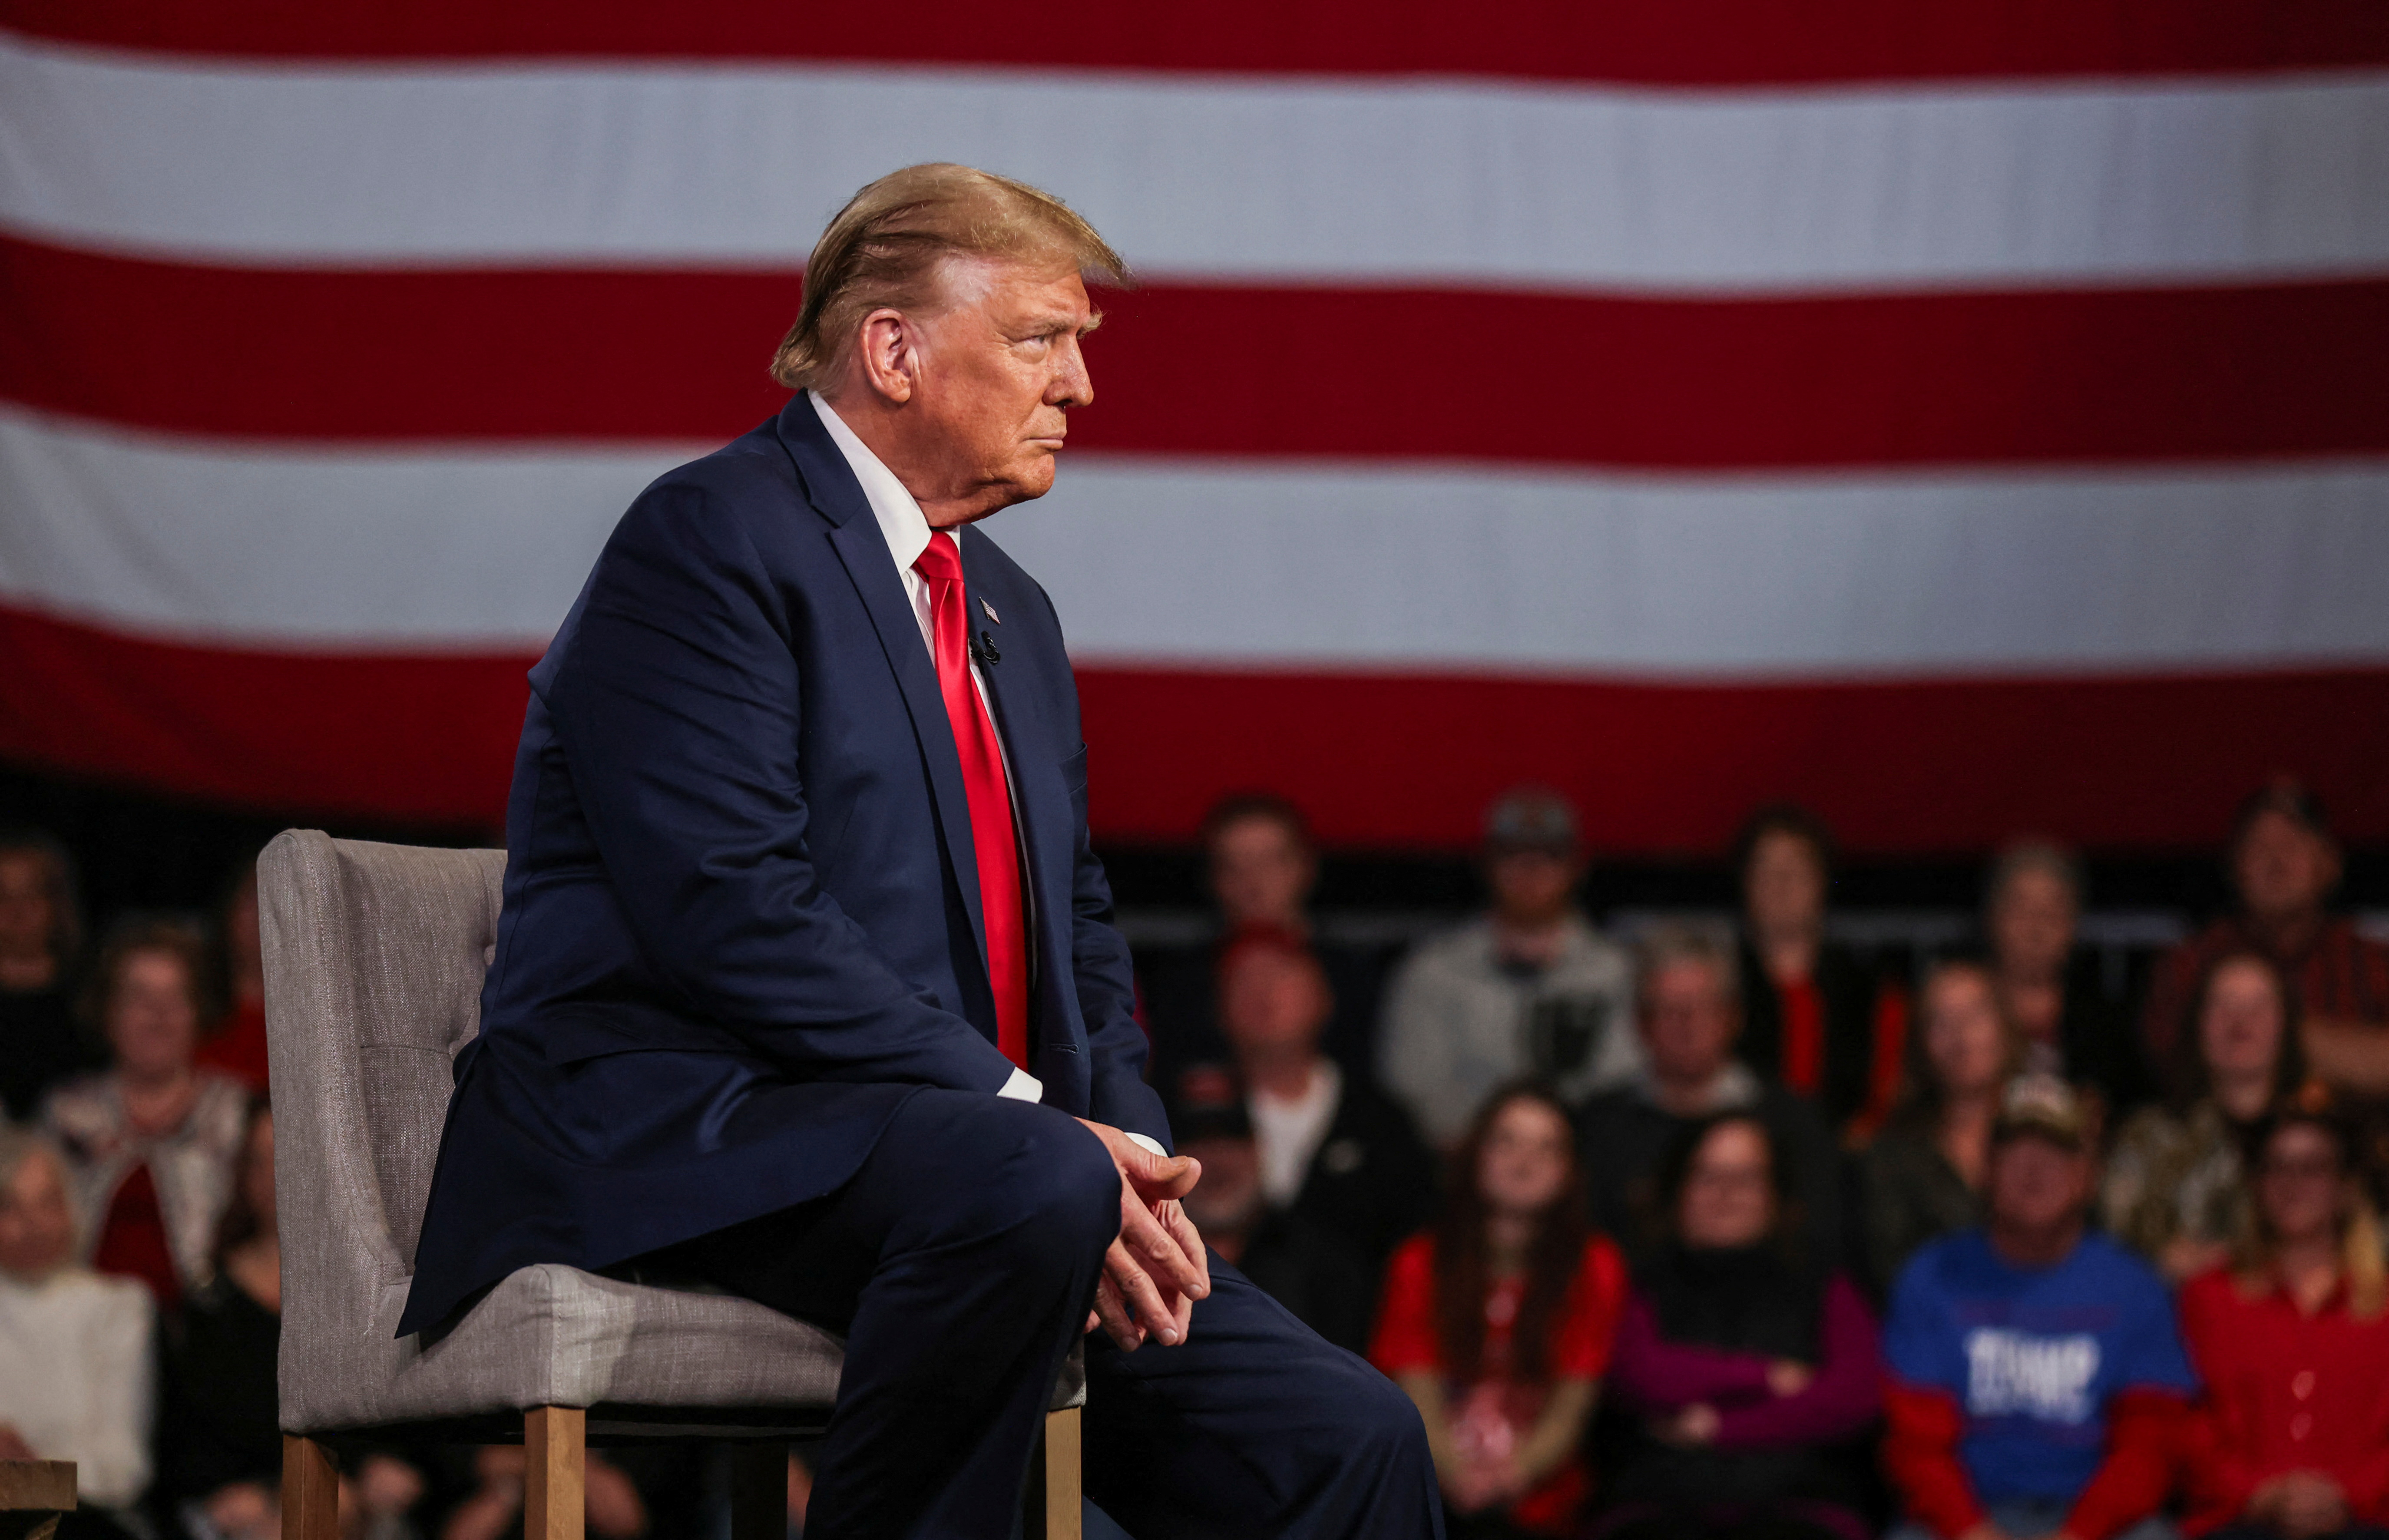 Trump participates in a Fox News town hall with Laura Ingraham in Greenville